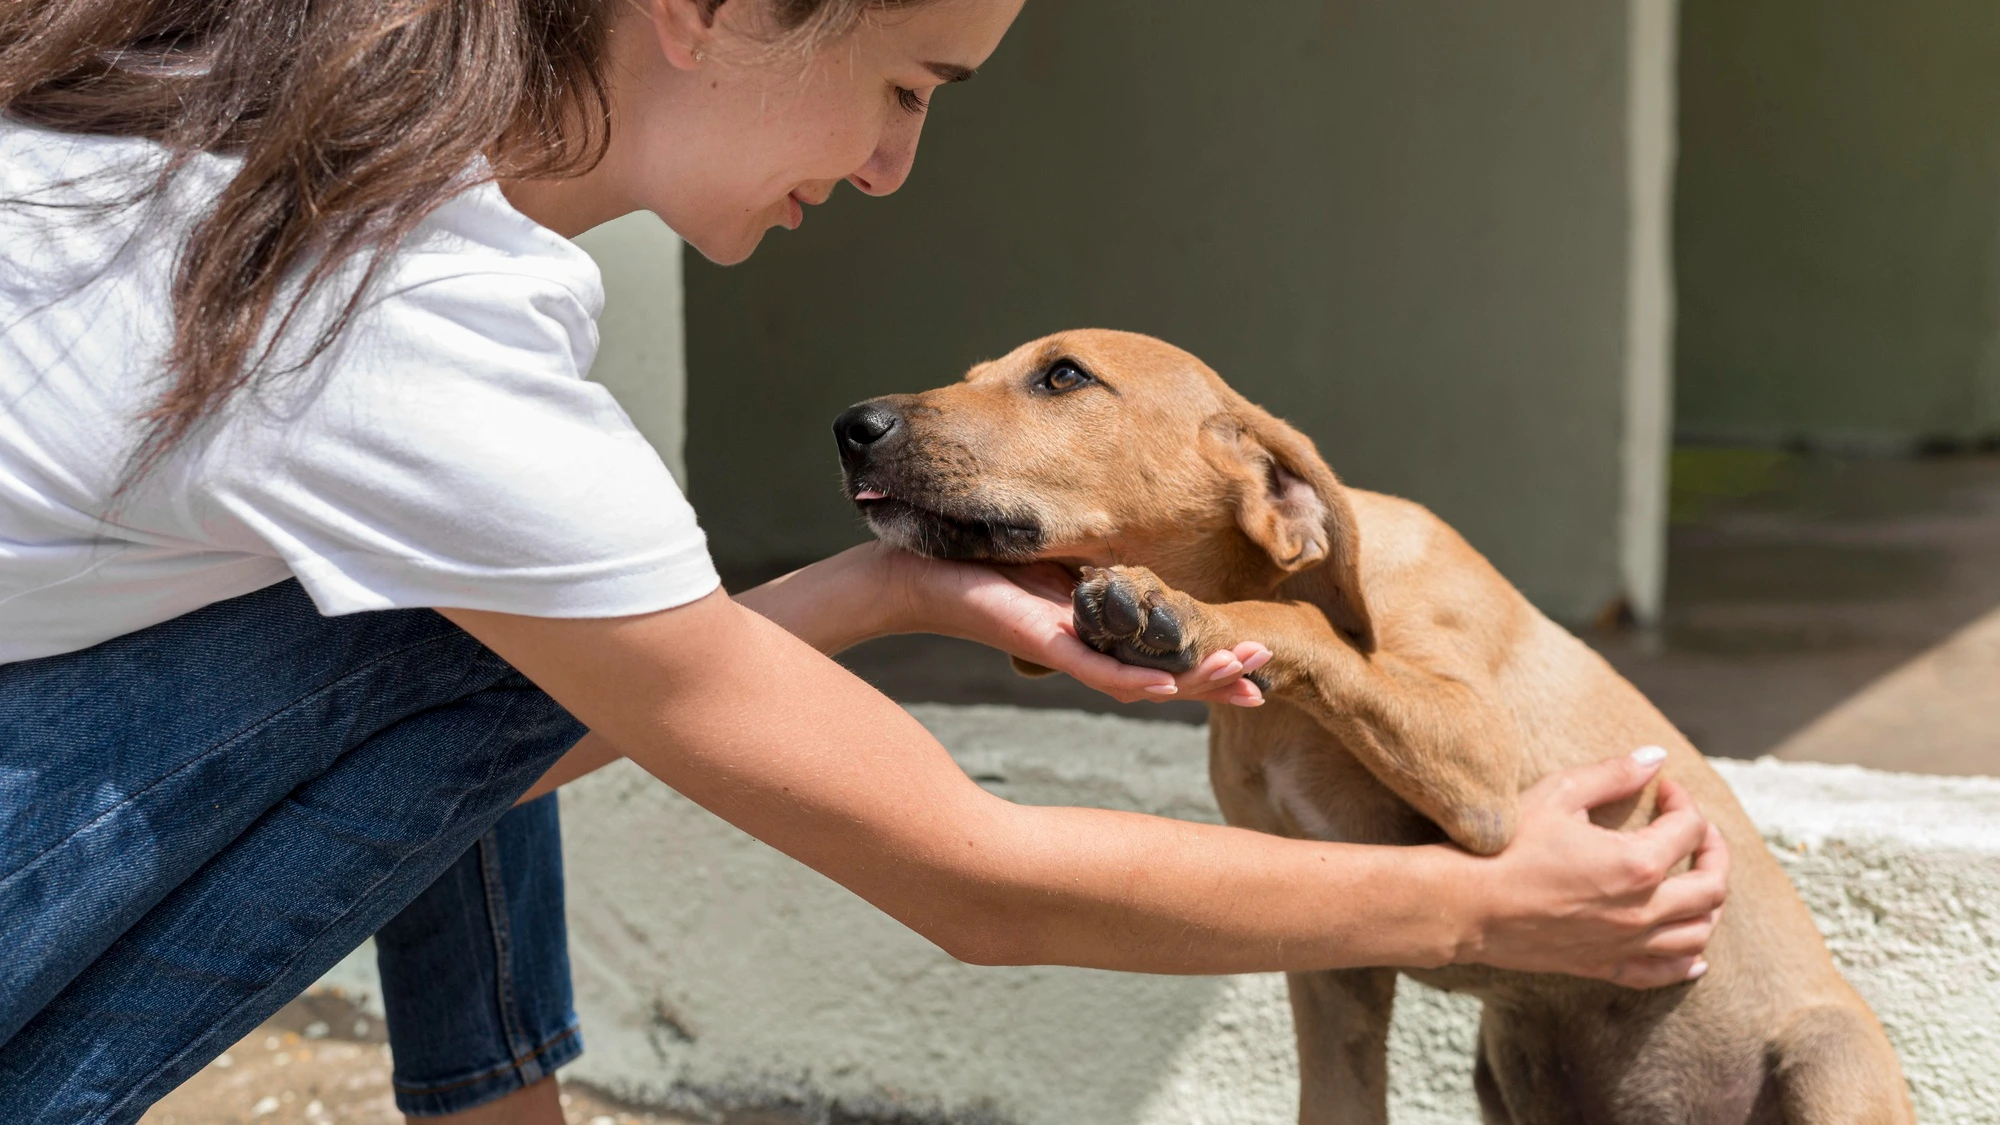 Rescuing and Rehabilitating Stray Animals